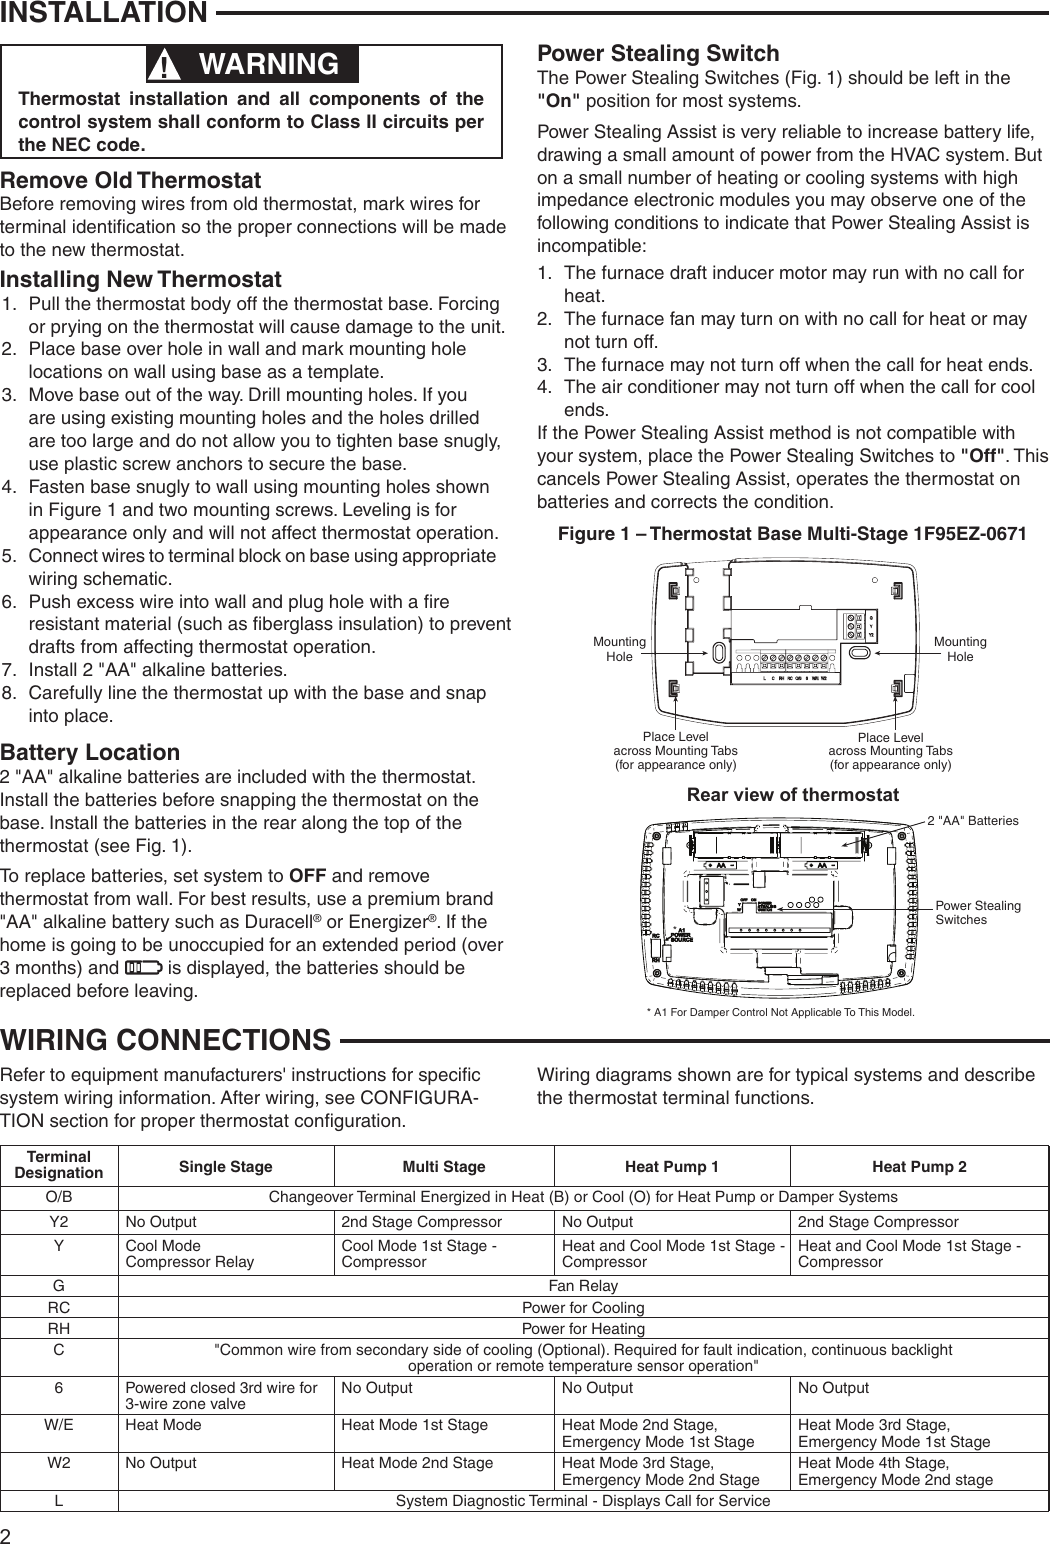 Page 2 of 8 - White-Rodgers White-Rodgers-1F95Ez-0671-Emerson-Blue-Easy-Reader-Thermostat-Installation-Instructions- 1F95EZ_0671_37-6986C  White-rodgers-1f95ez-0671-emerson-blue-easy-reader-thermostat-installation-instructions